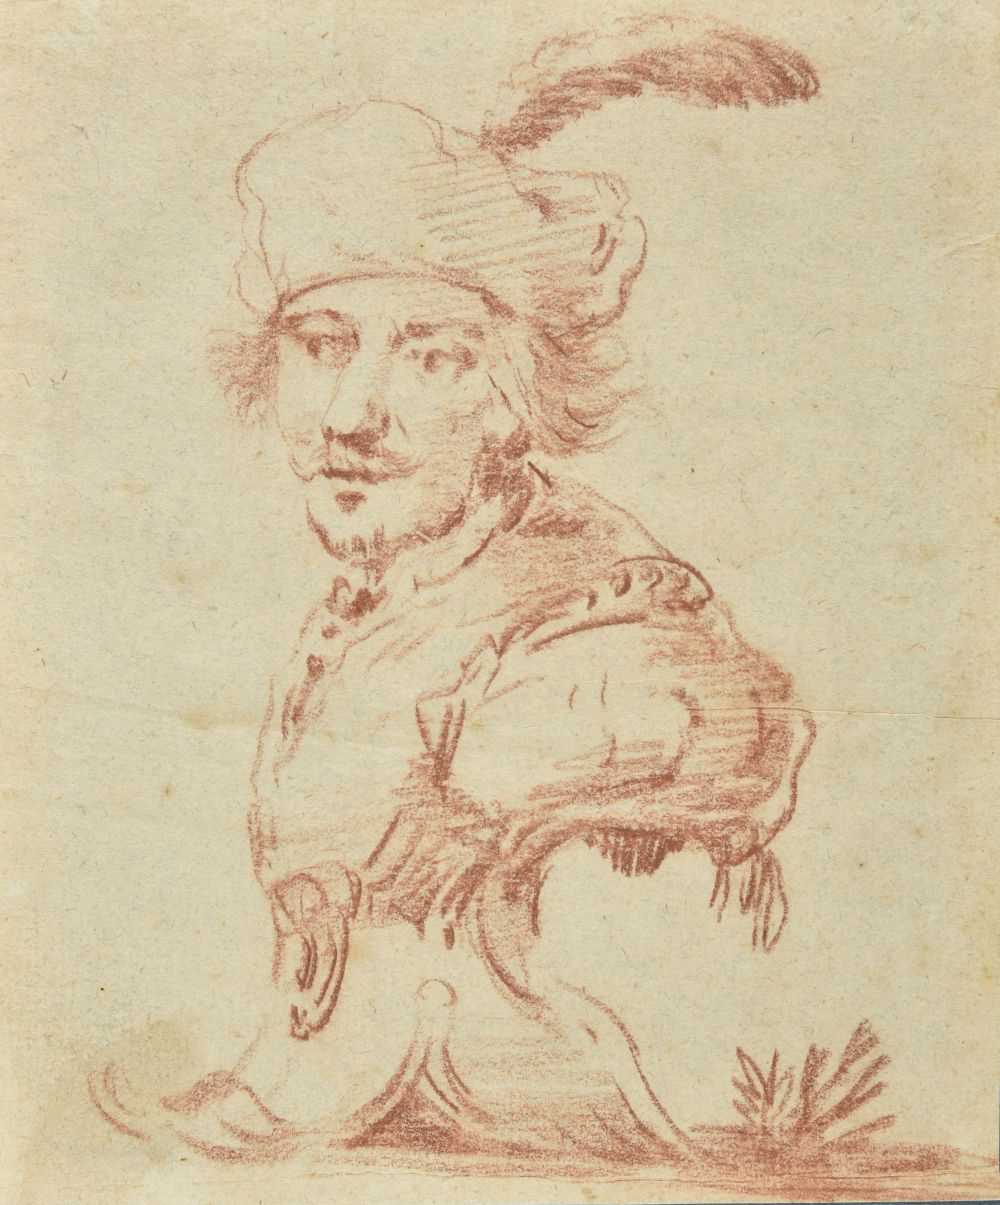 Lot 307 - Attributed to Cornelis Troost (1697-1750). Design for a sculpted bust of a man, and others